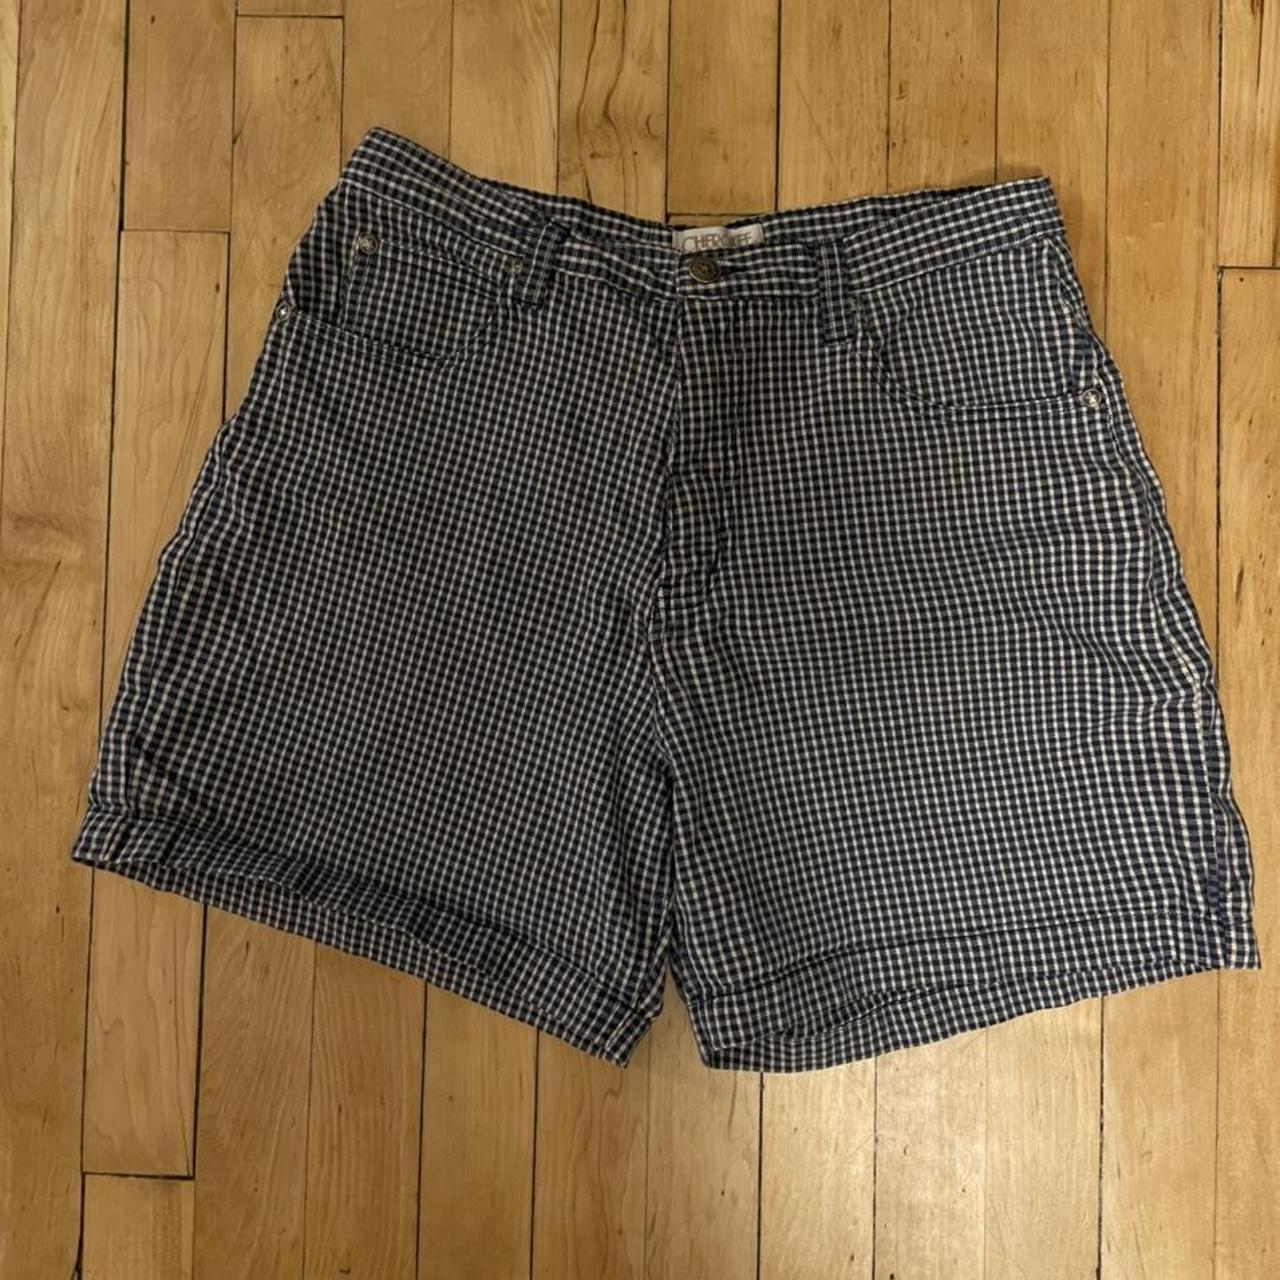 Blue and white checkered shorts! These shorts are... - Depop